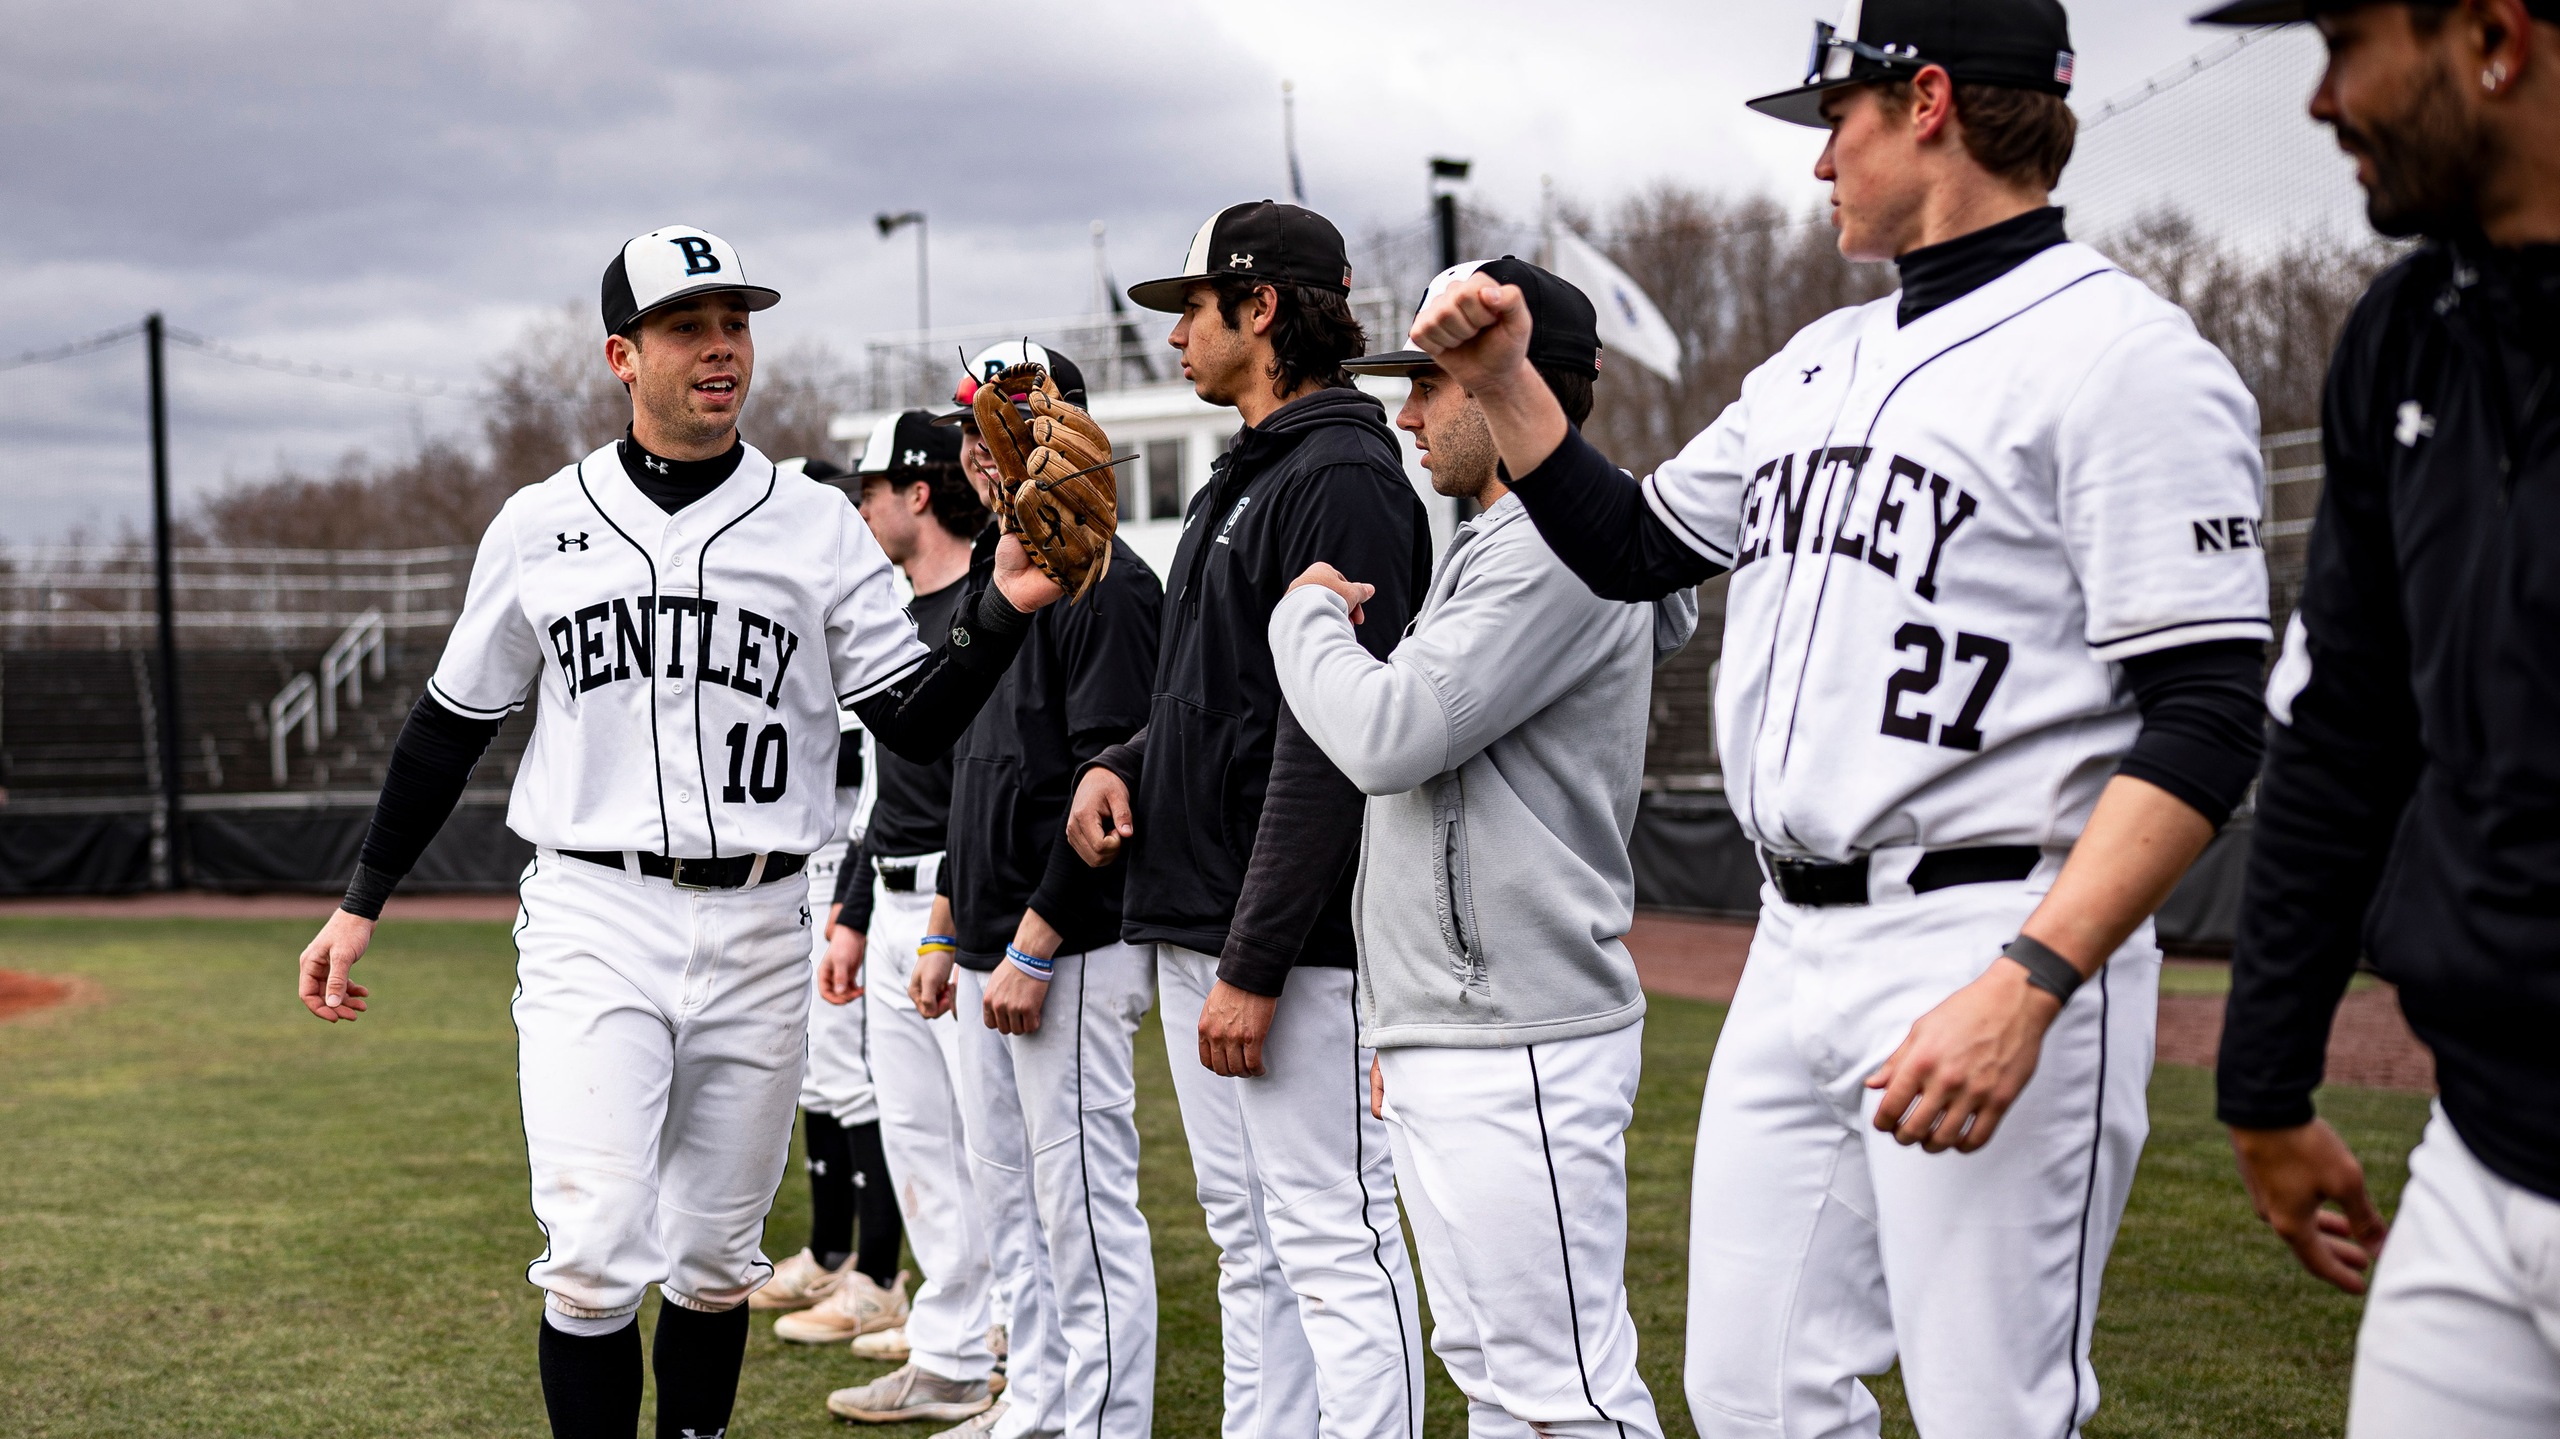 Bentley set for a six-game NE10 week, including a weekend at home